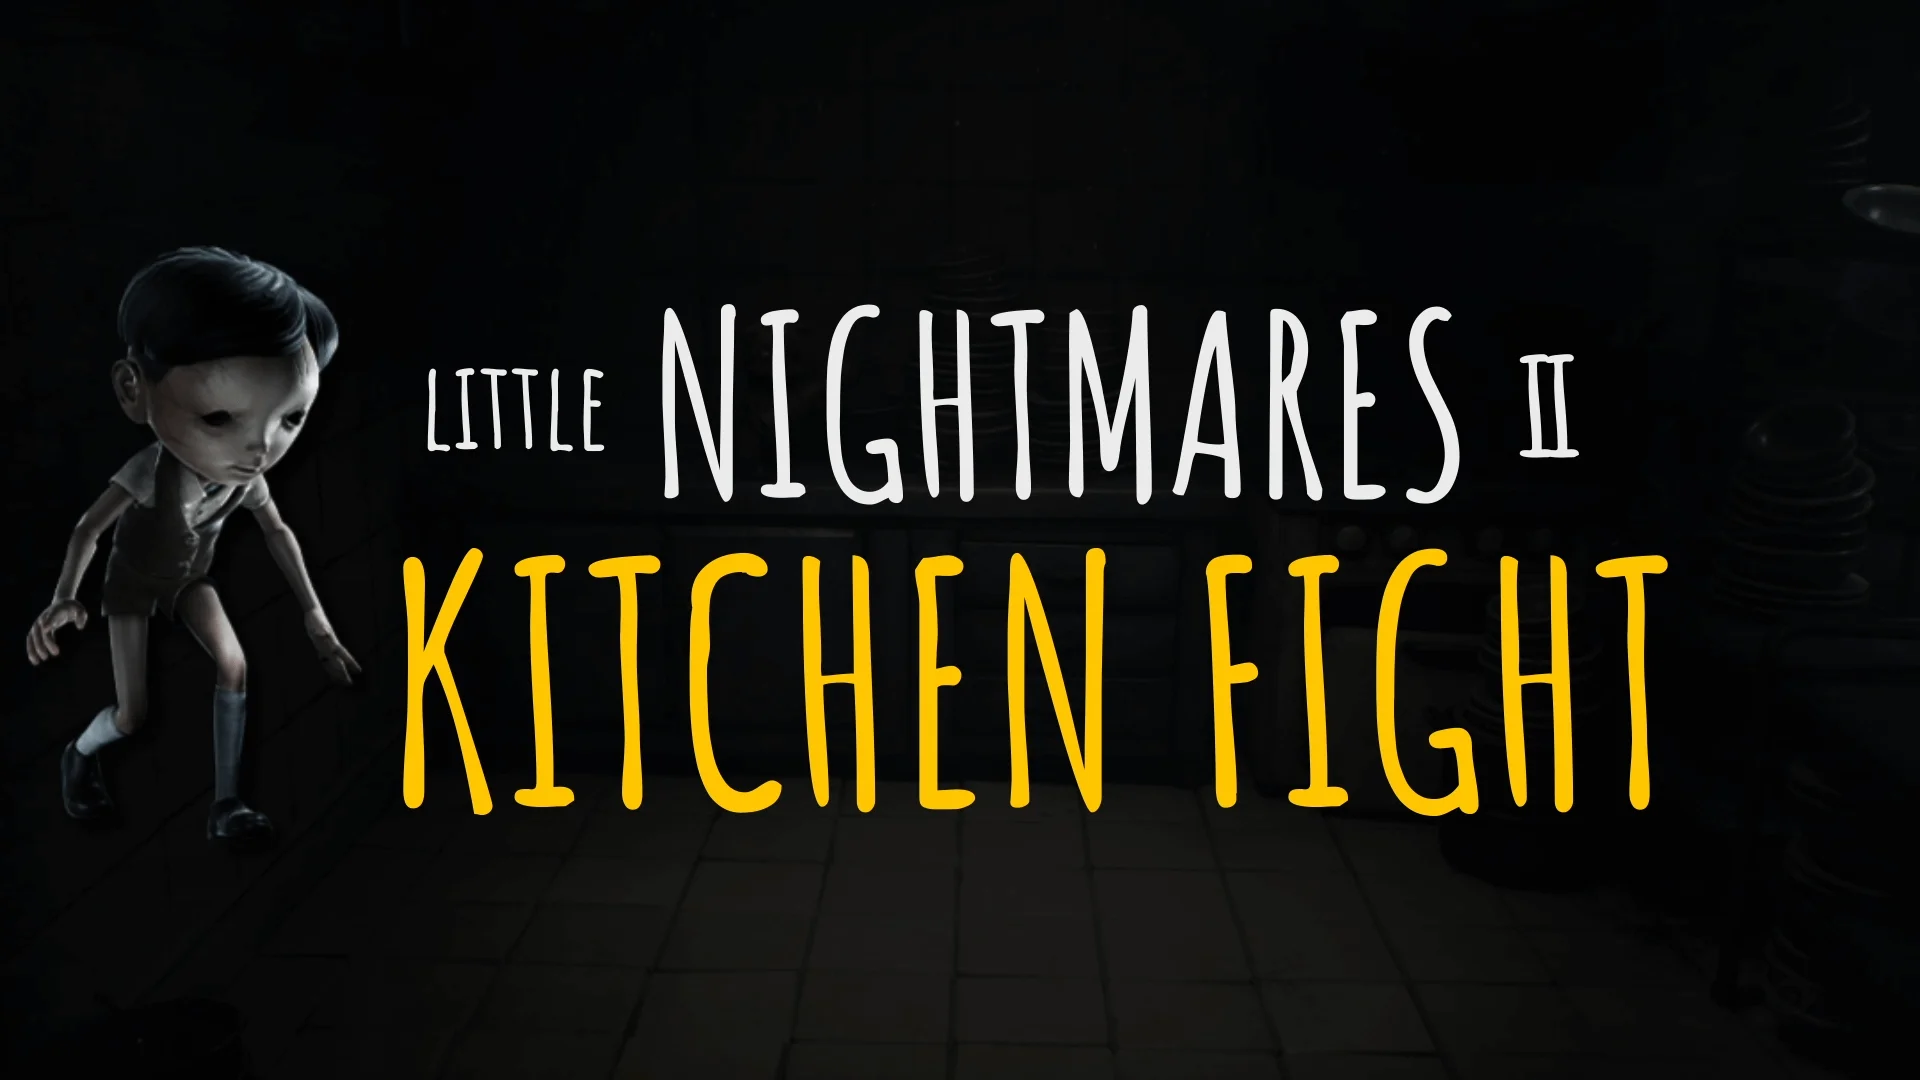 Little Nightmares 2 Kitchen Fight and Cafeteria Walkthrough